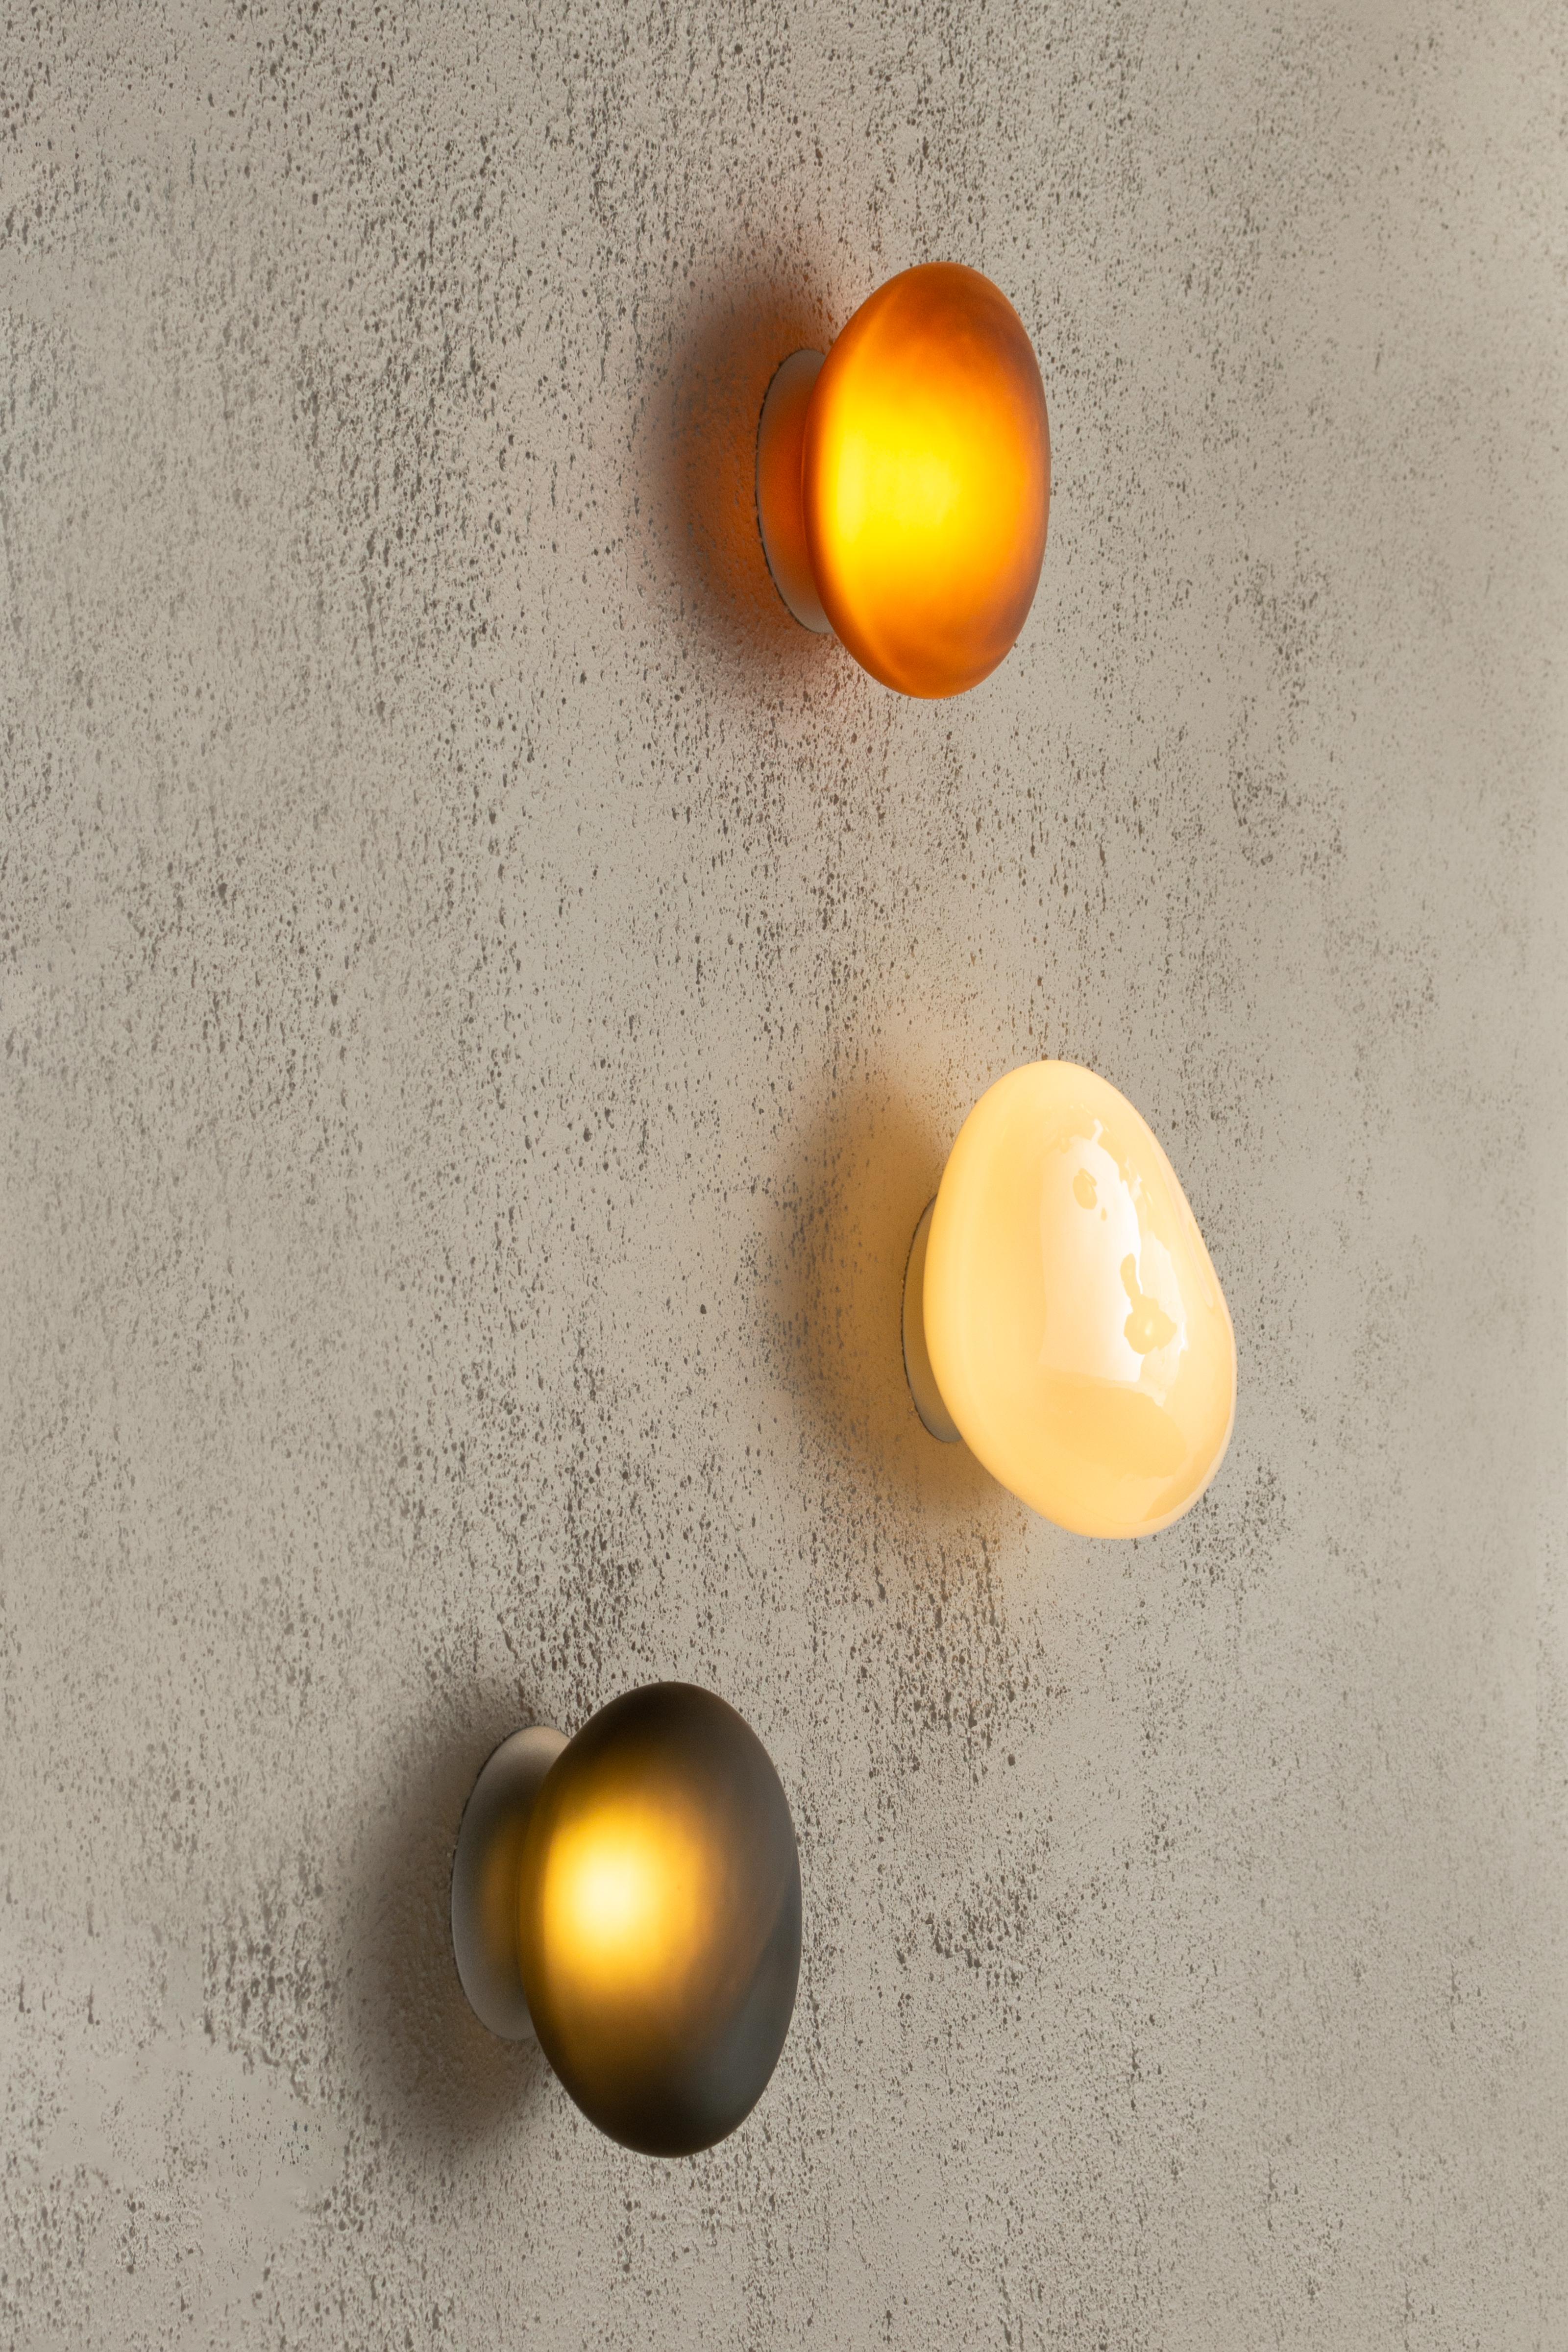 Contemporary wall lamp pebble 

Electrical : 
Voltage: 110 – 277V / 220 – 240V
Integral LED source : 1 x 9W LED

The model shown in picture:
Dimensions: B: 34.5 x 22 x 12.5 cm 
Color: Slate
______
Pebble
The Pebble series celebrates the